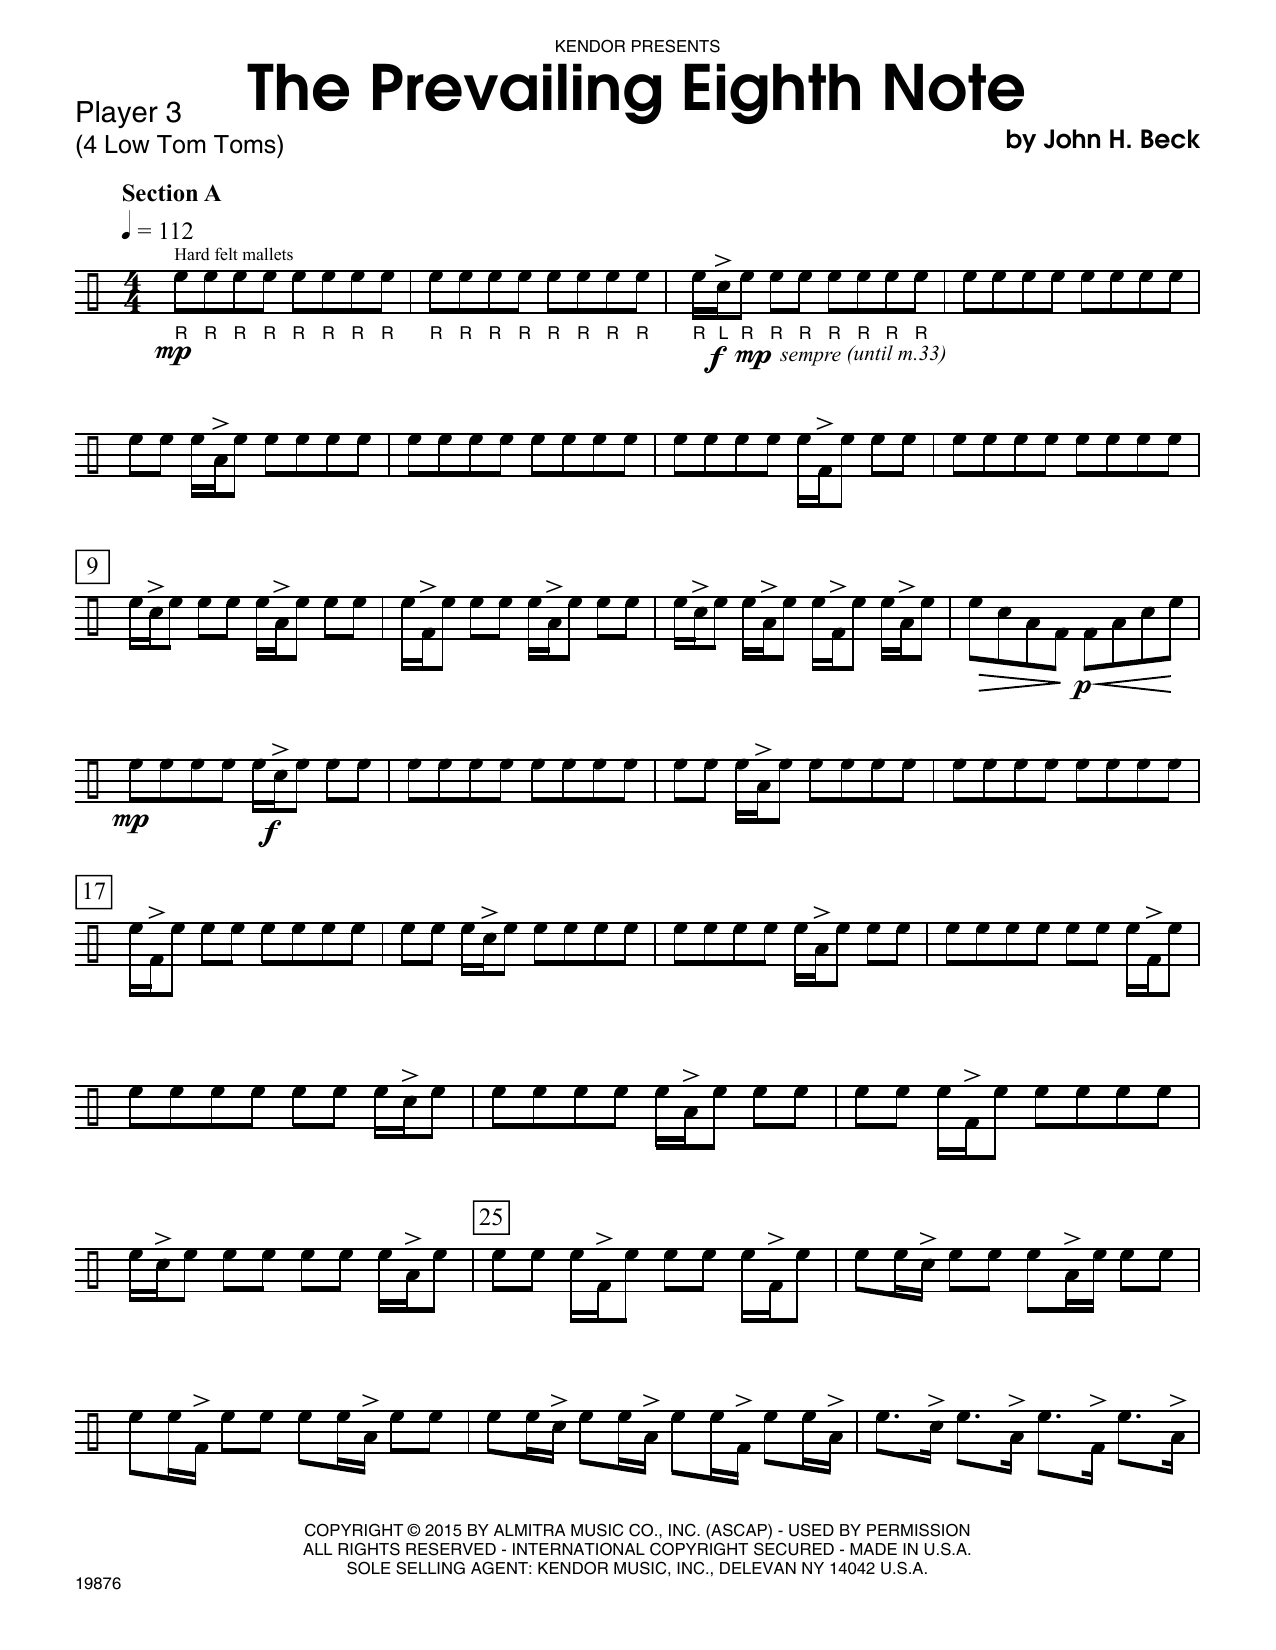 Download John H. Beck The Prevailing Eighth Note - Percussion Sheet Music